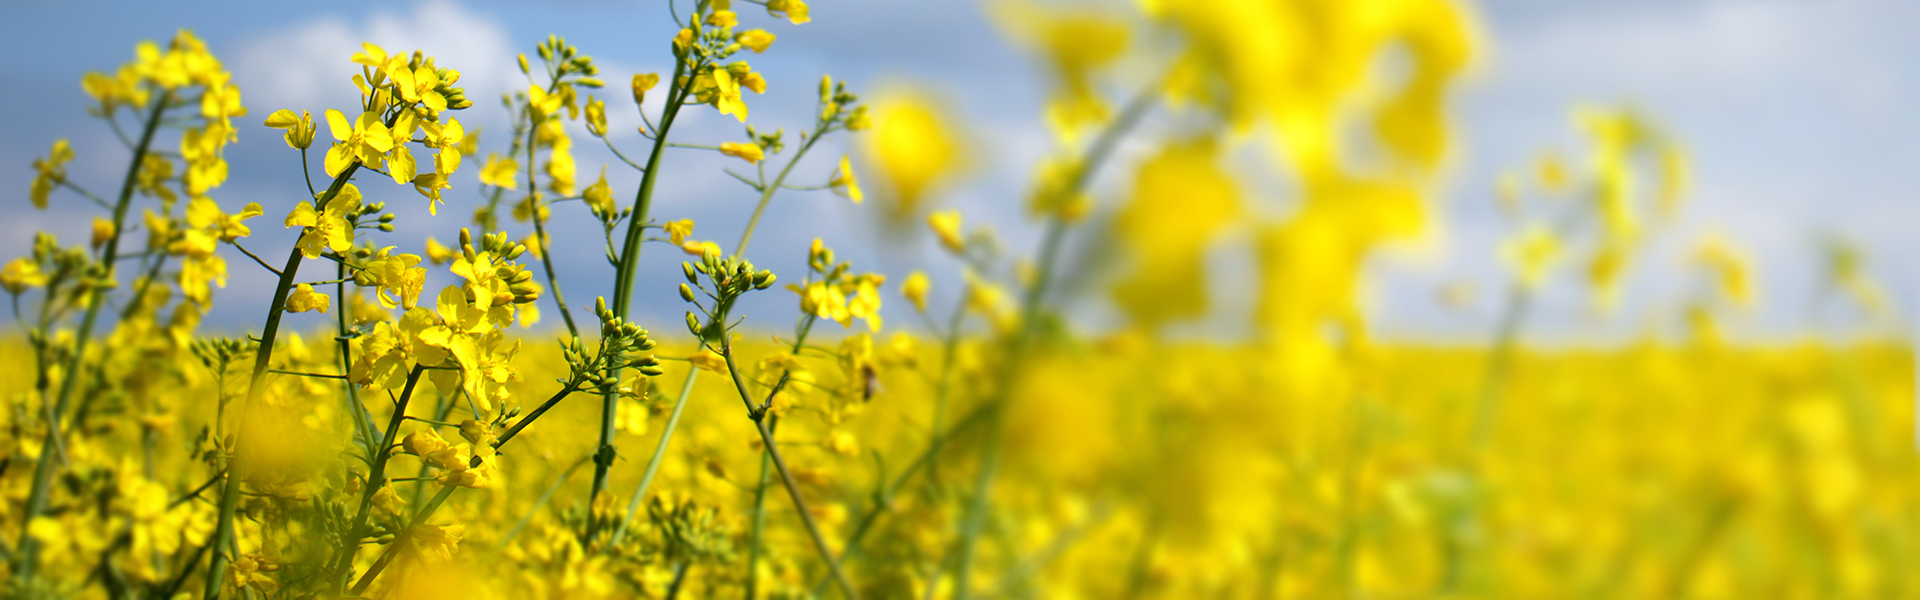 Mature Canola field in Northern Alberta - learn more about Park Memorial